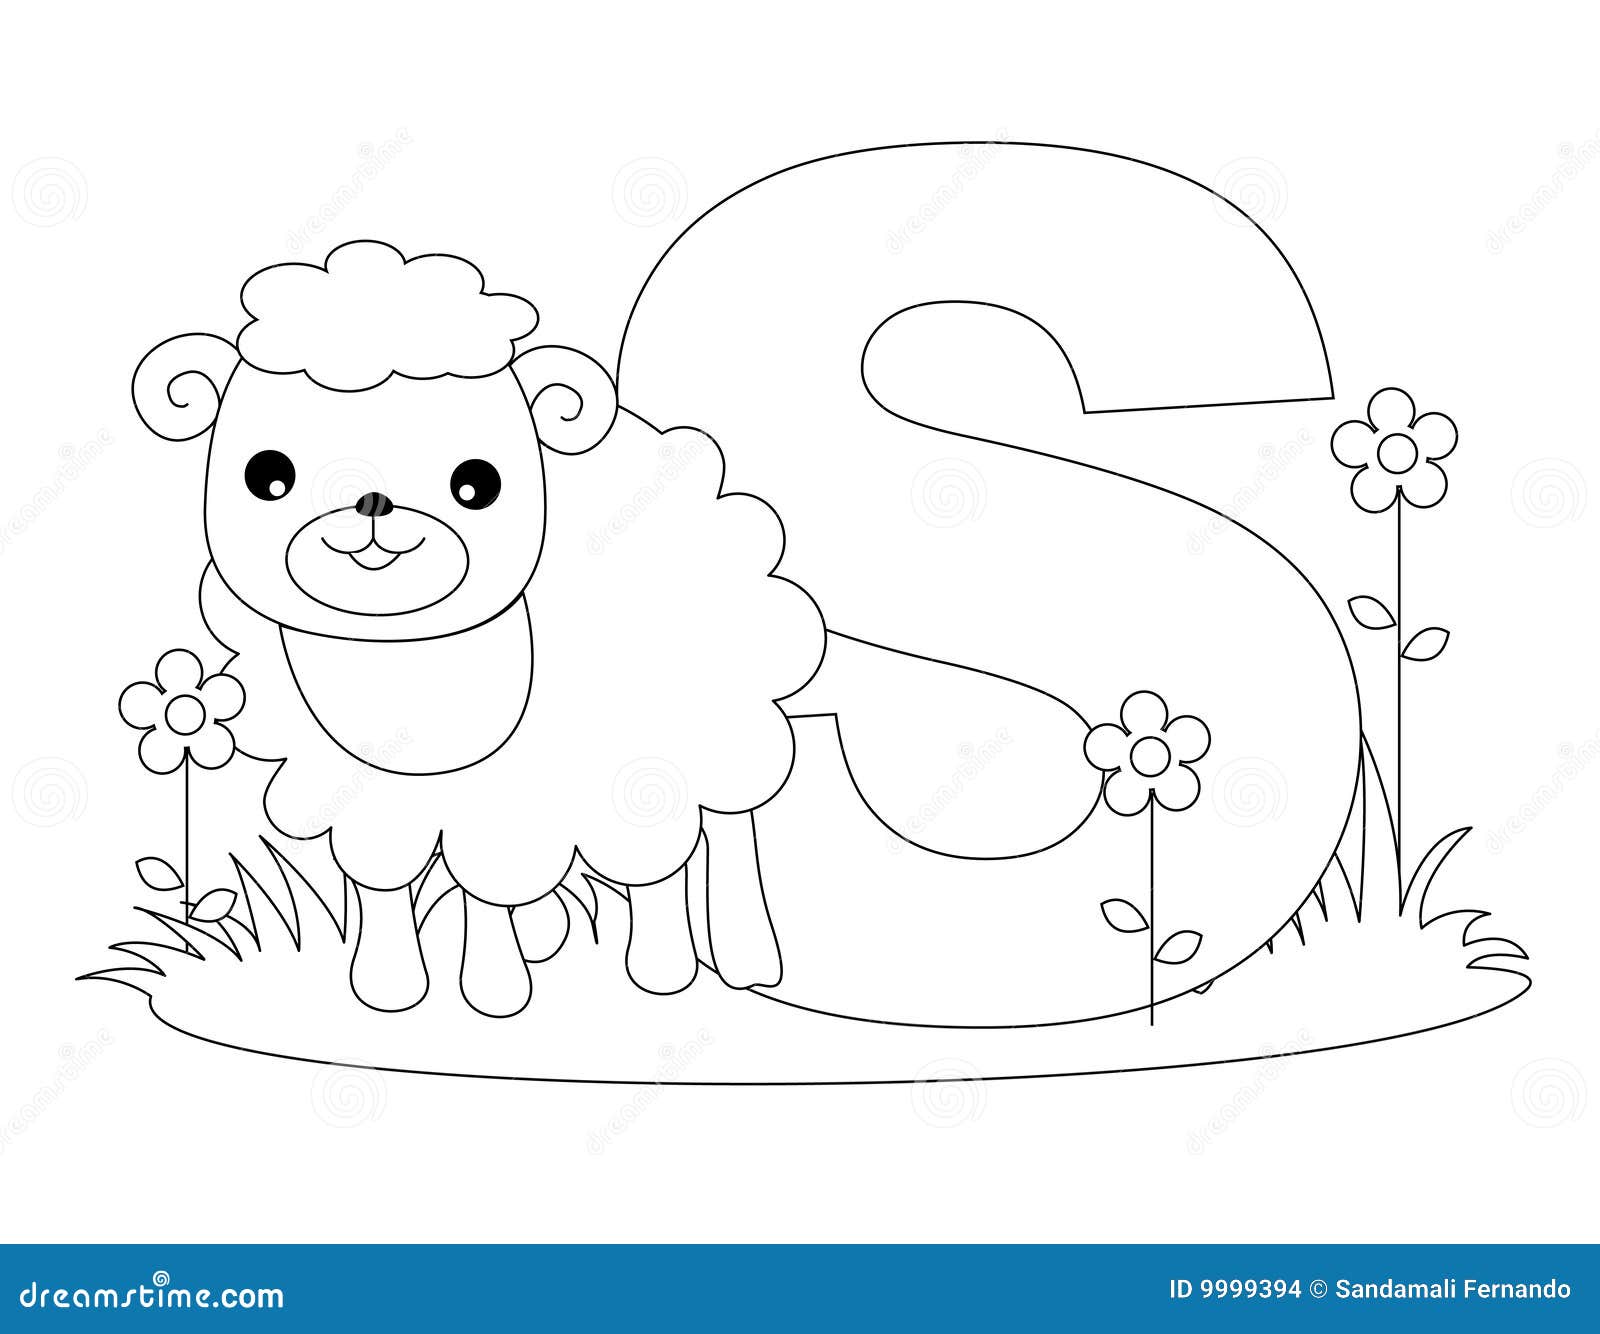 Animal Alphabet S Coloring Page Stock Vector   Illustration of ...